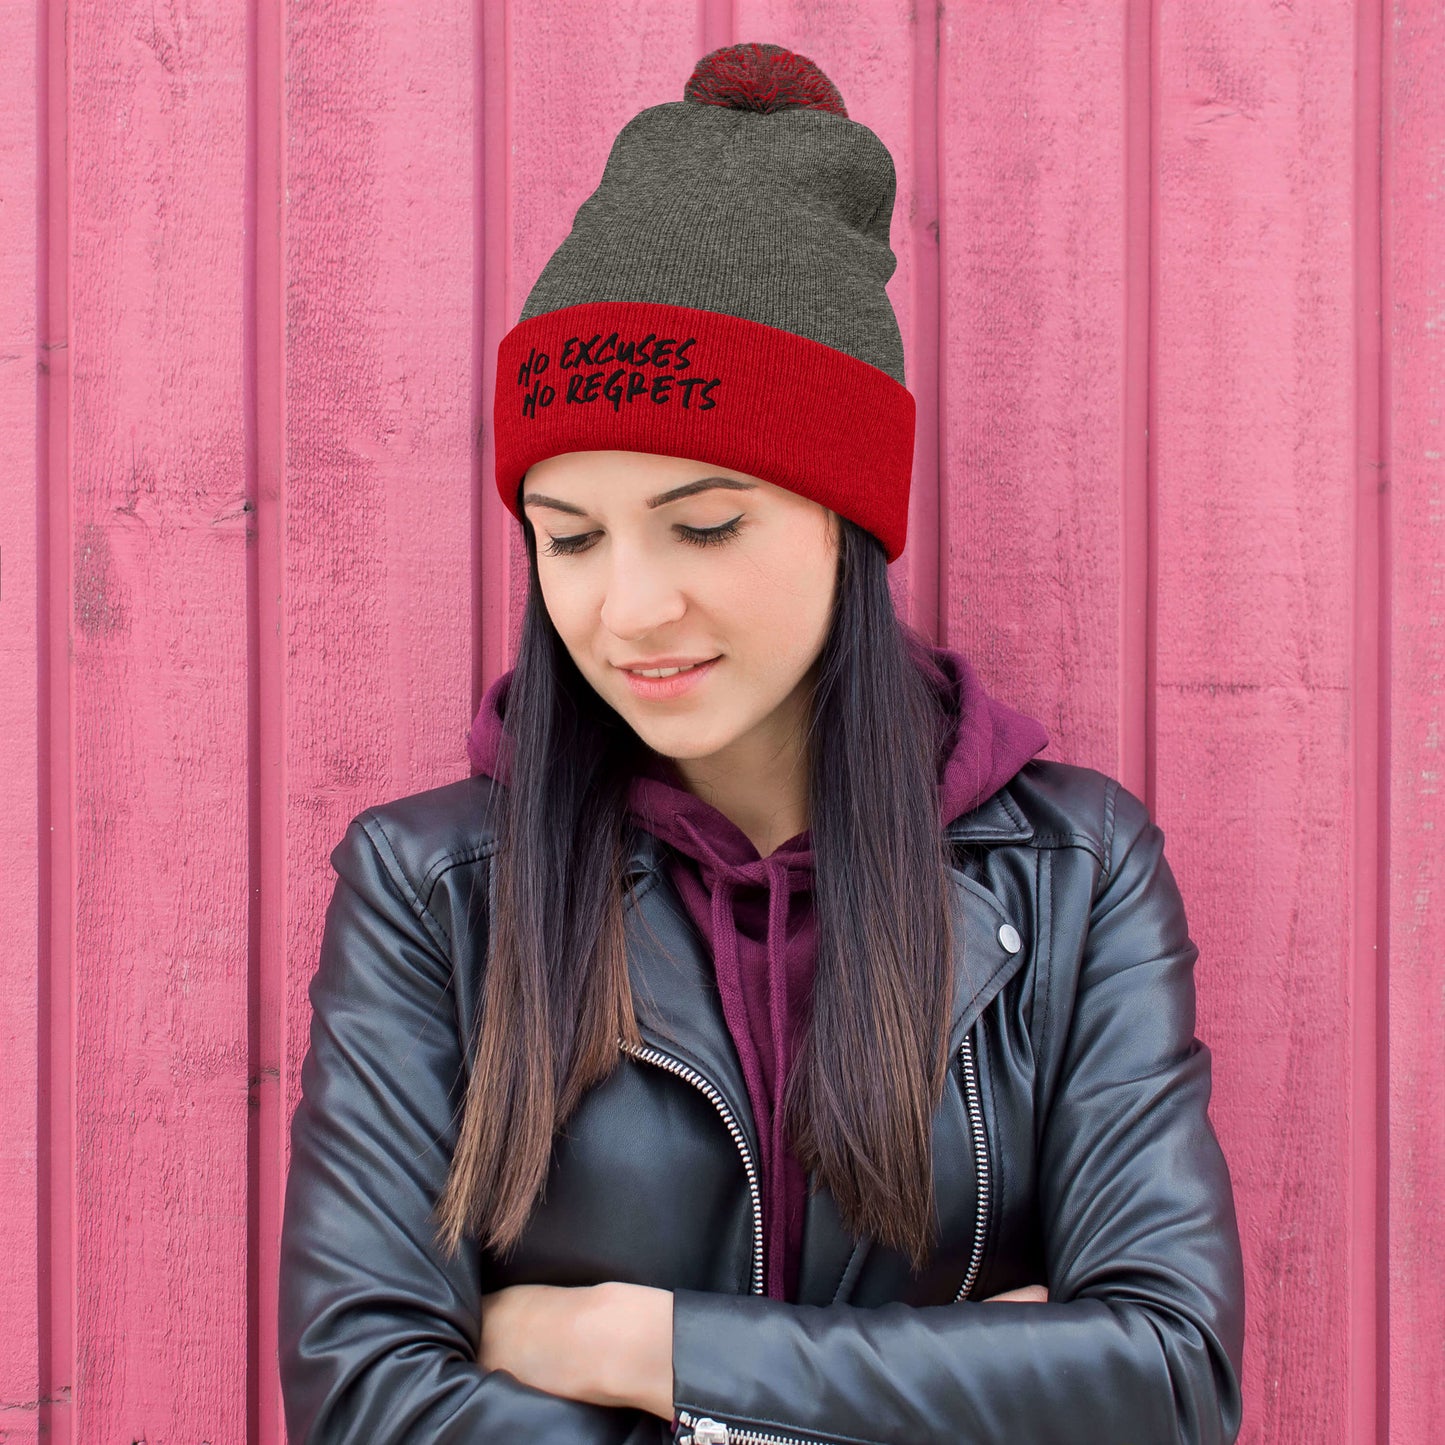 NO EXCUSES NO REGRETS ~ NENR EMBROIDERED BEANIE